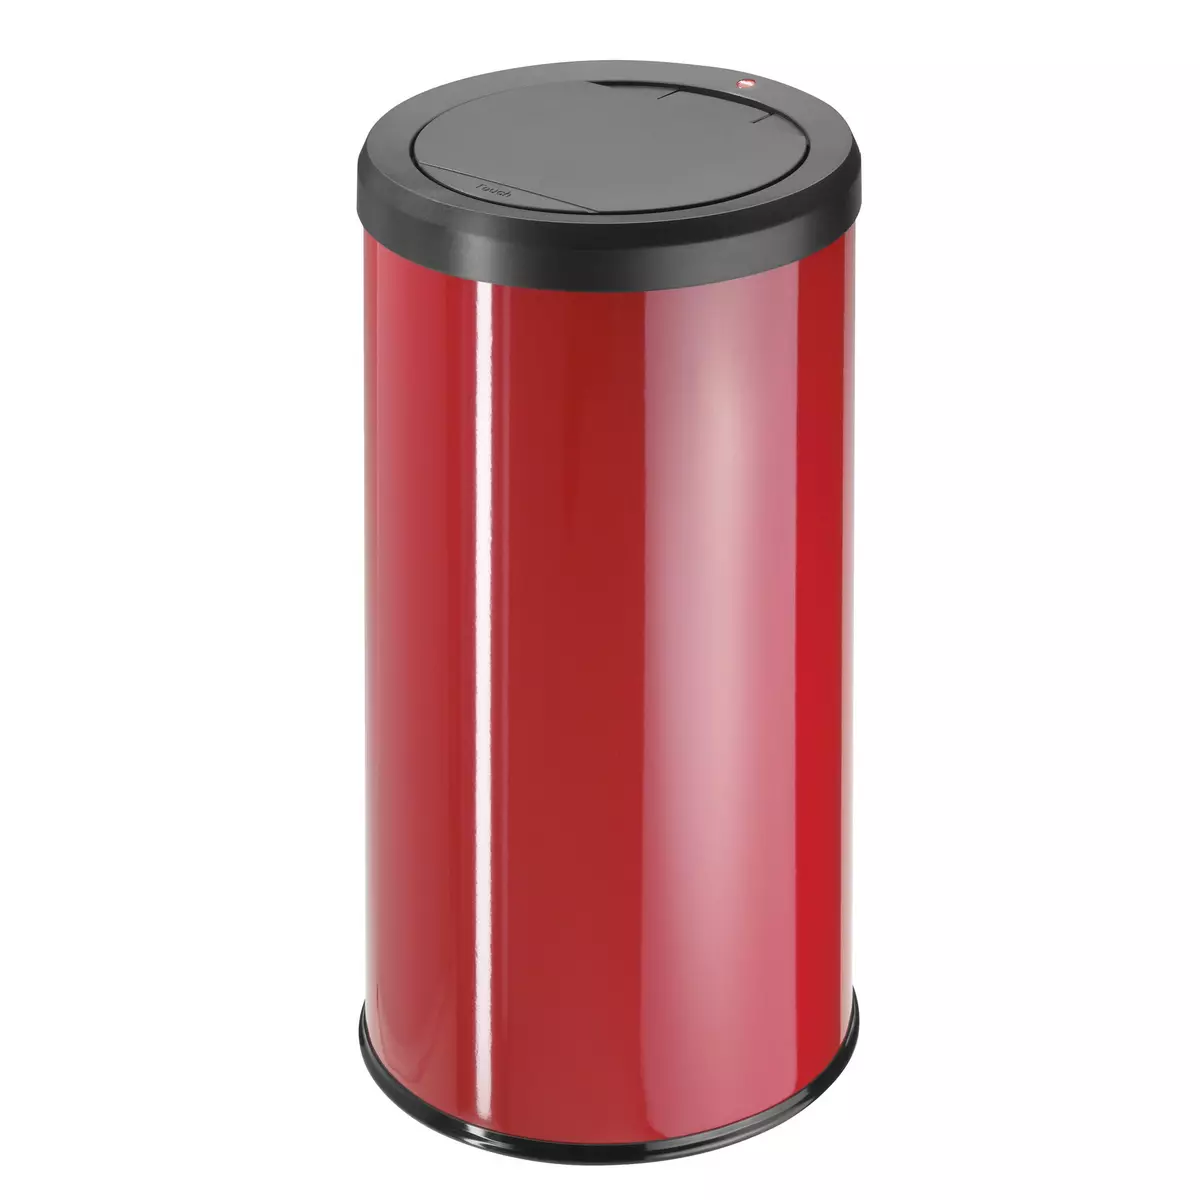 HAILO Collecteur grand volume 45L rouge BigBin Touch